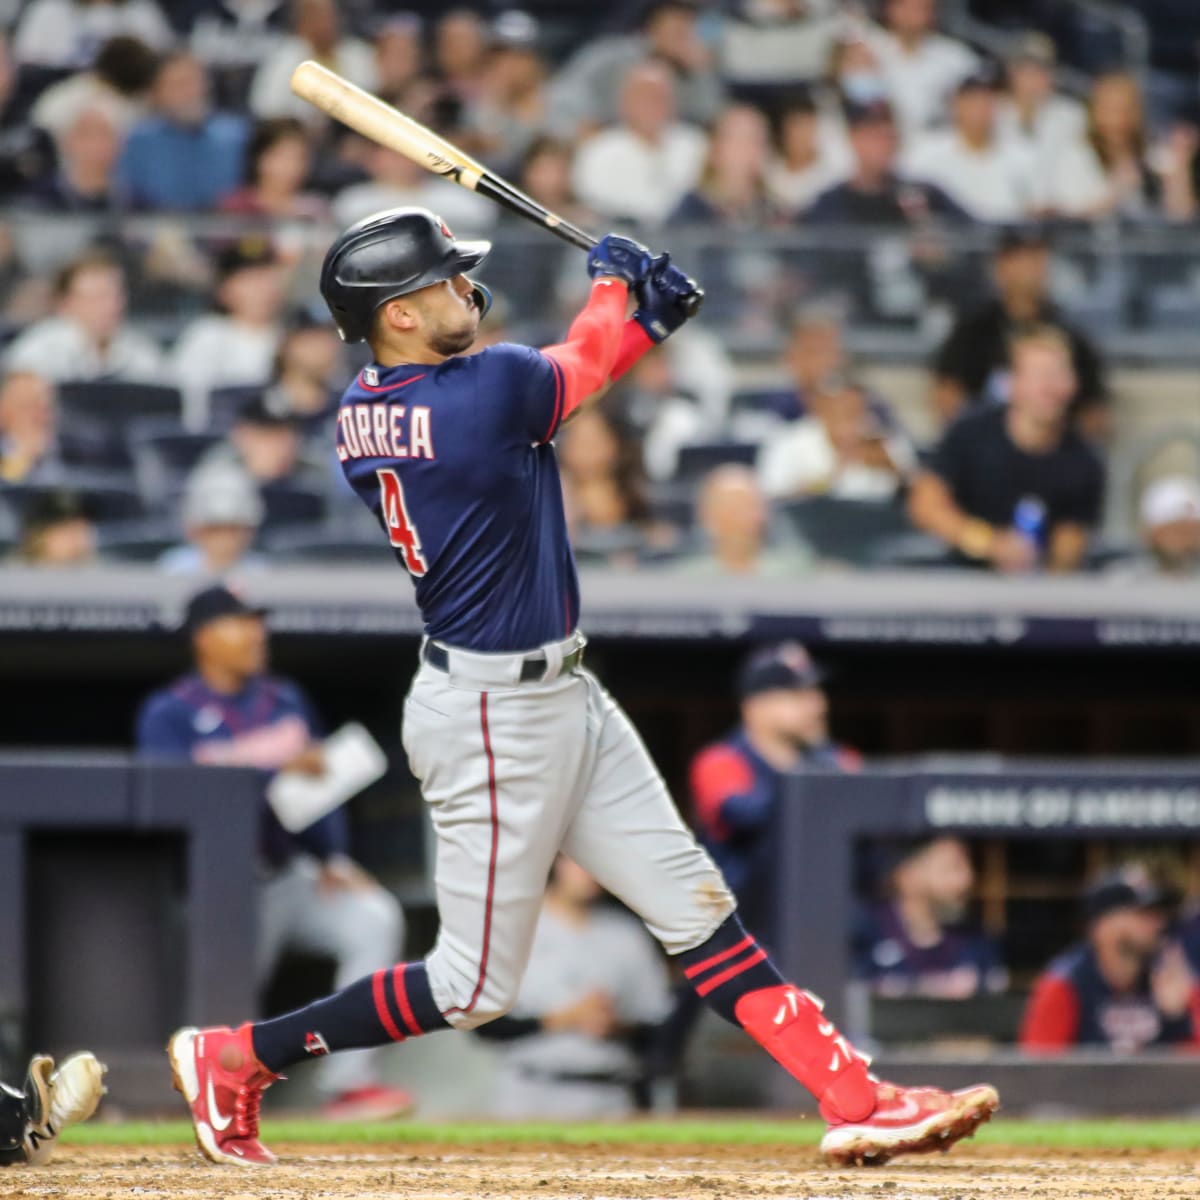 Carlos Correa rumors: Cubs among favorites for top free agent